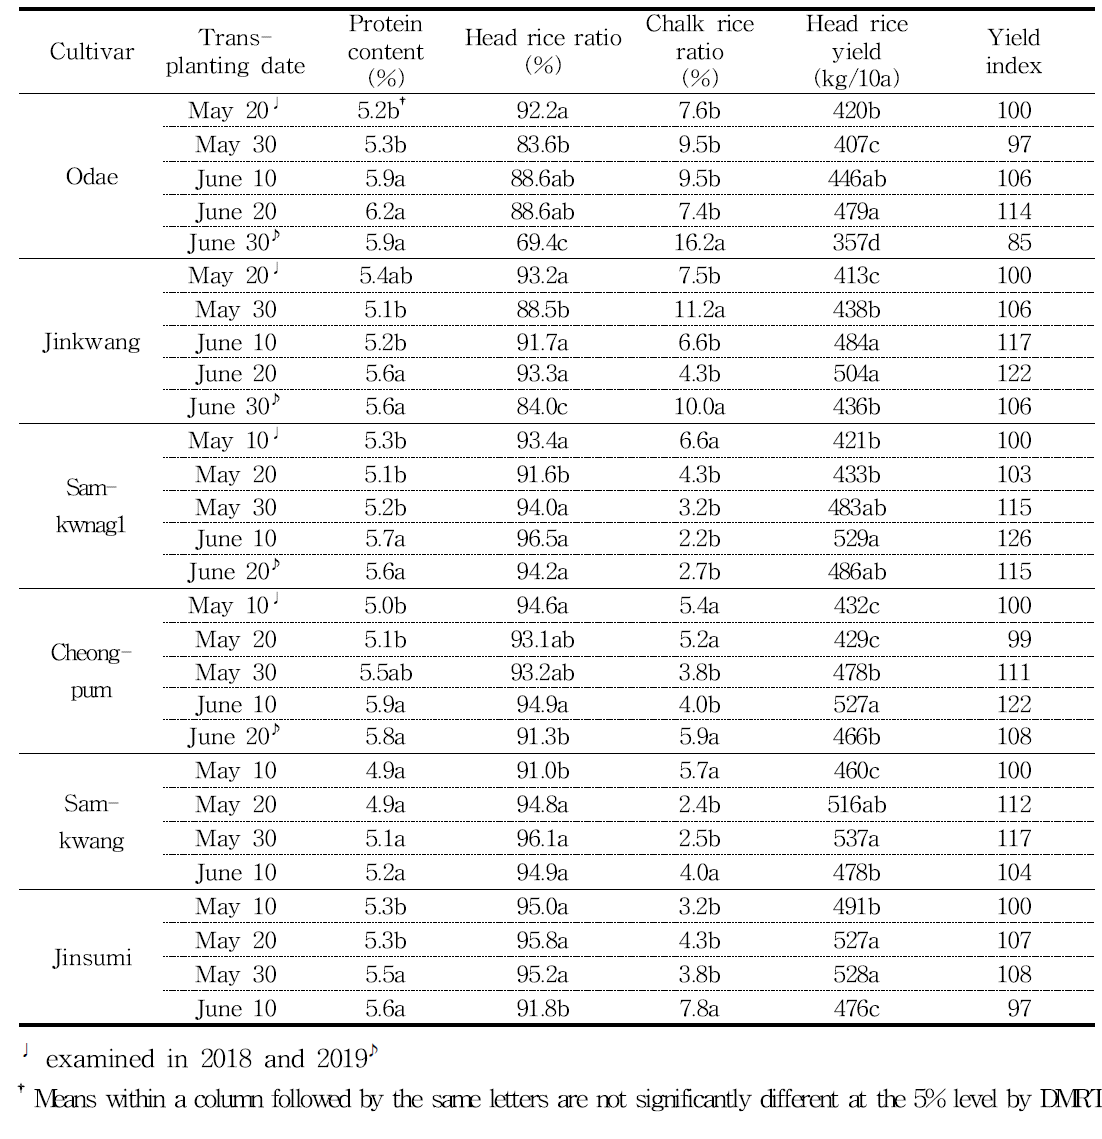 Protein content, rice quality properties and head rice yield affected by transplanting date in central mid-mountainous area